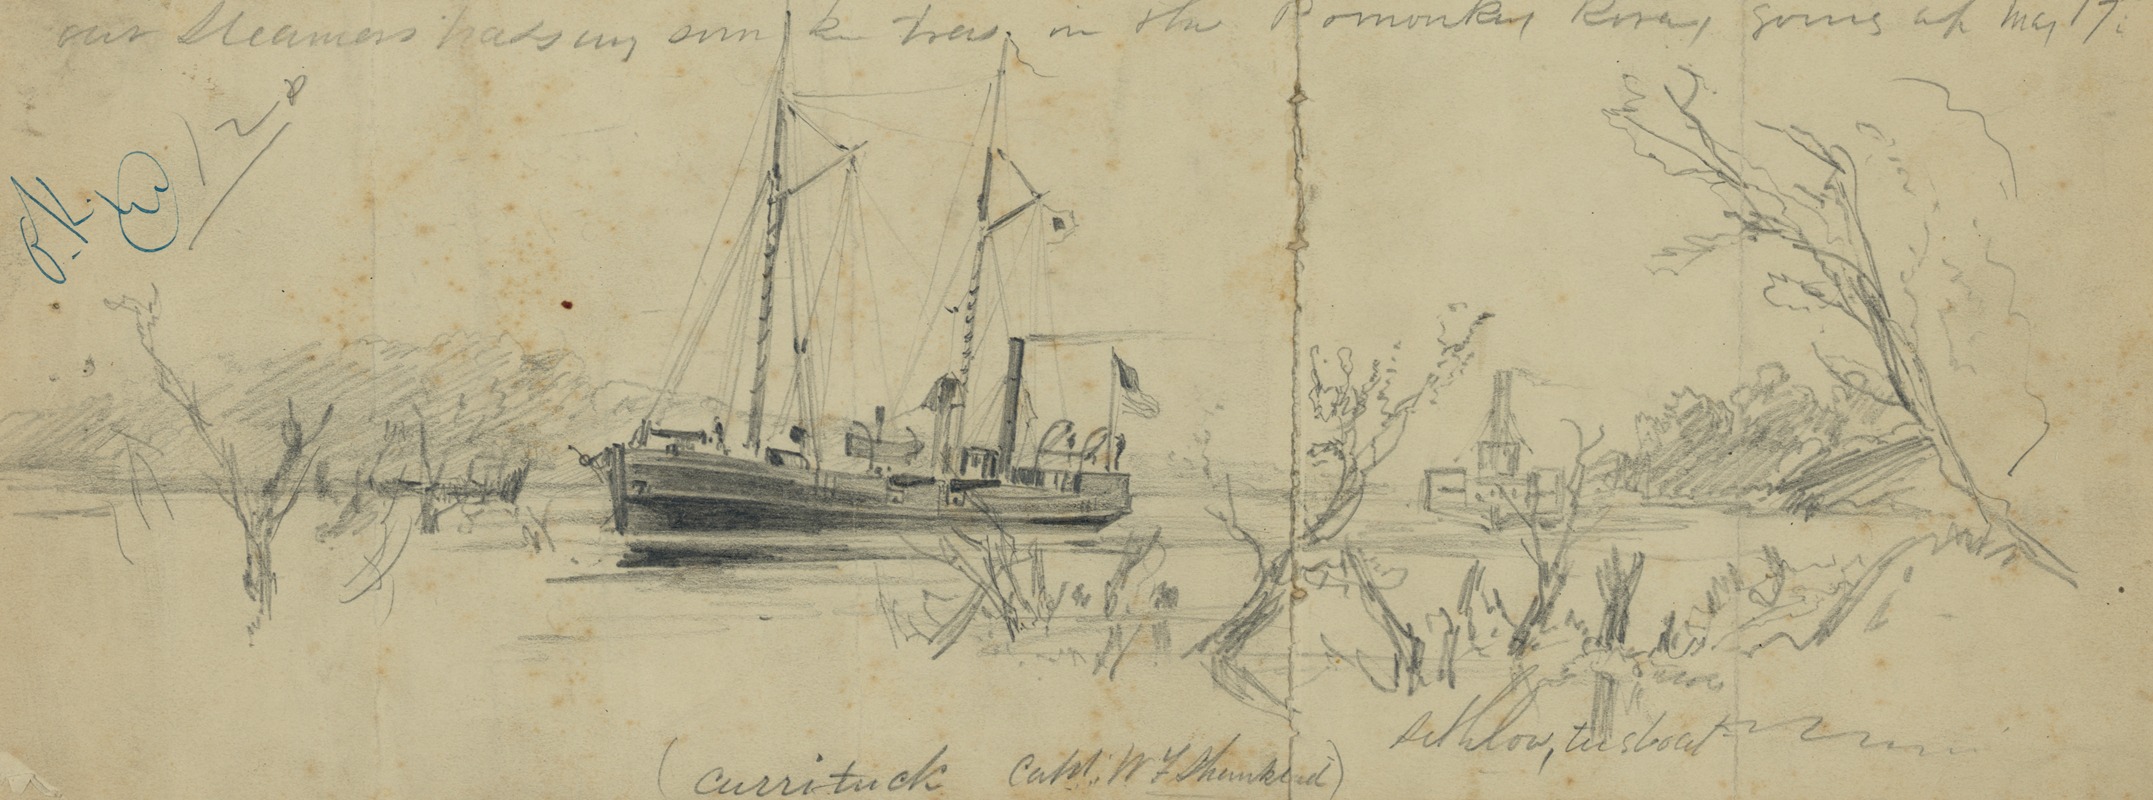 Arthur Lumley - Our Steamers passing sunken trees in the Pomonkey[sic] River, going up May 17th